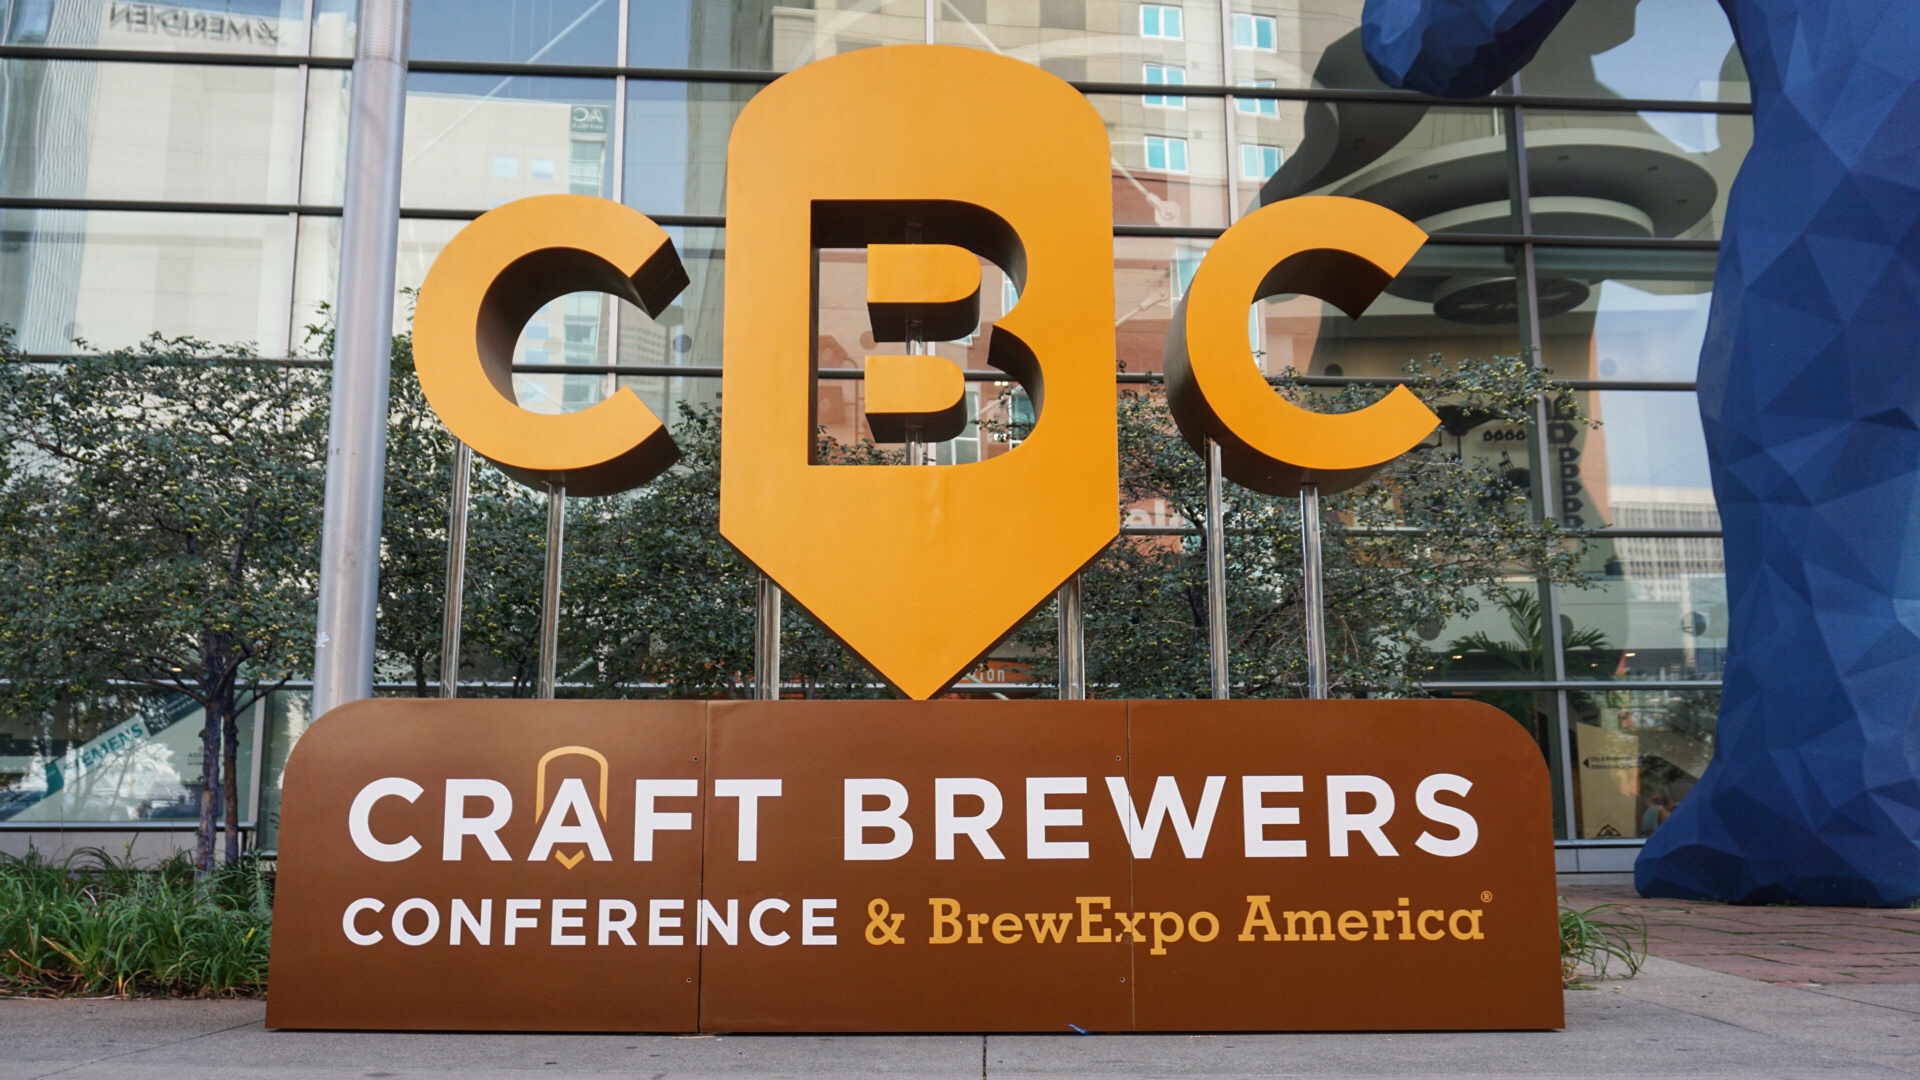 Dates & Locations Announced for Future Craft Brewers Conferences